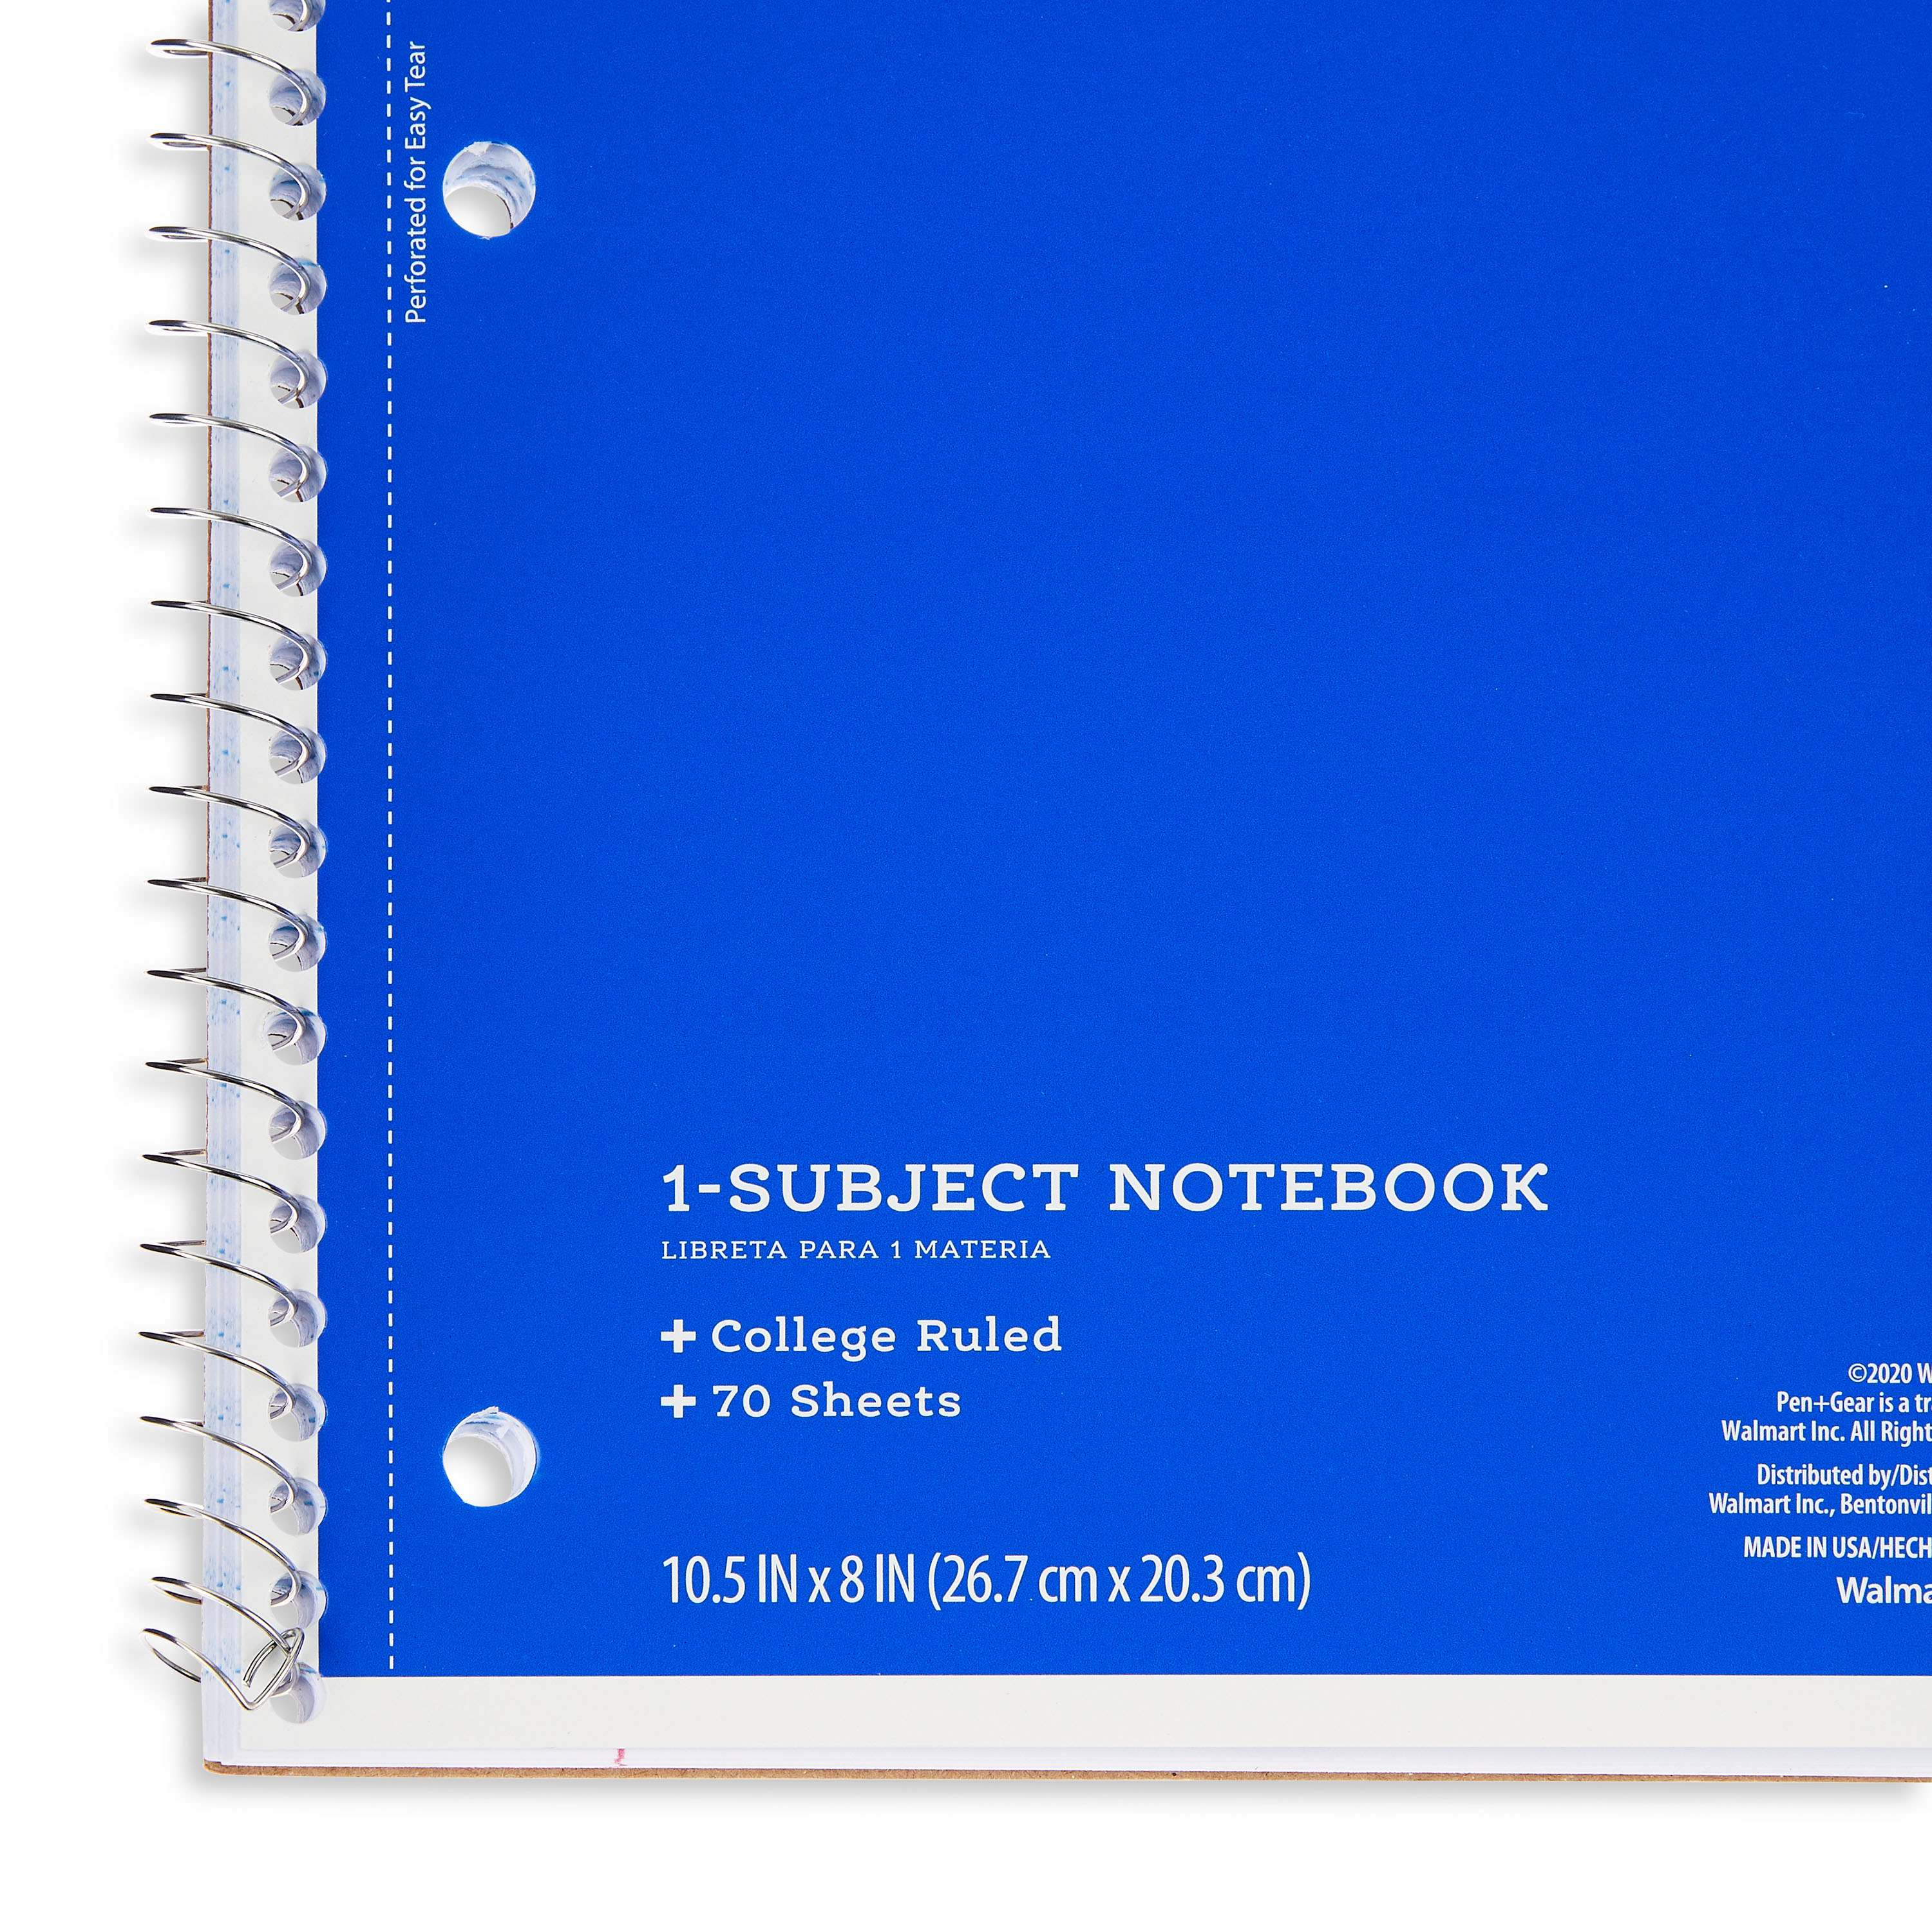 Pen + Gear 1-Subject Notebook, College Ruled, Blue, 70 Sheets - image 4 of 6